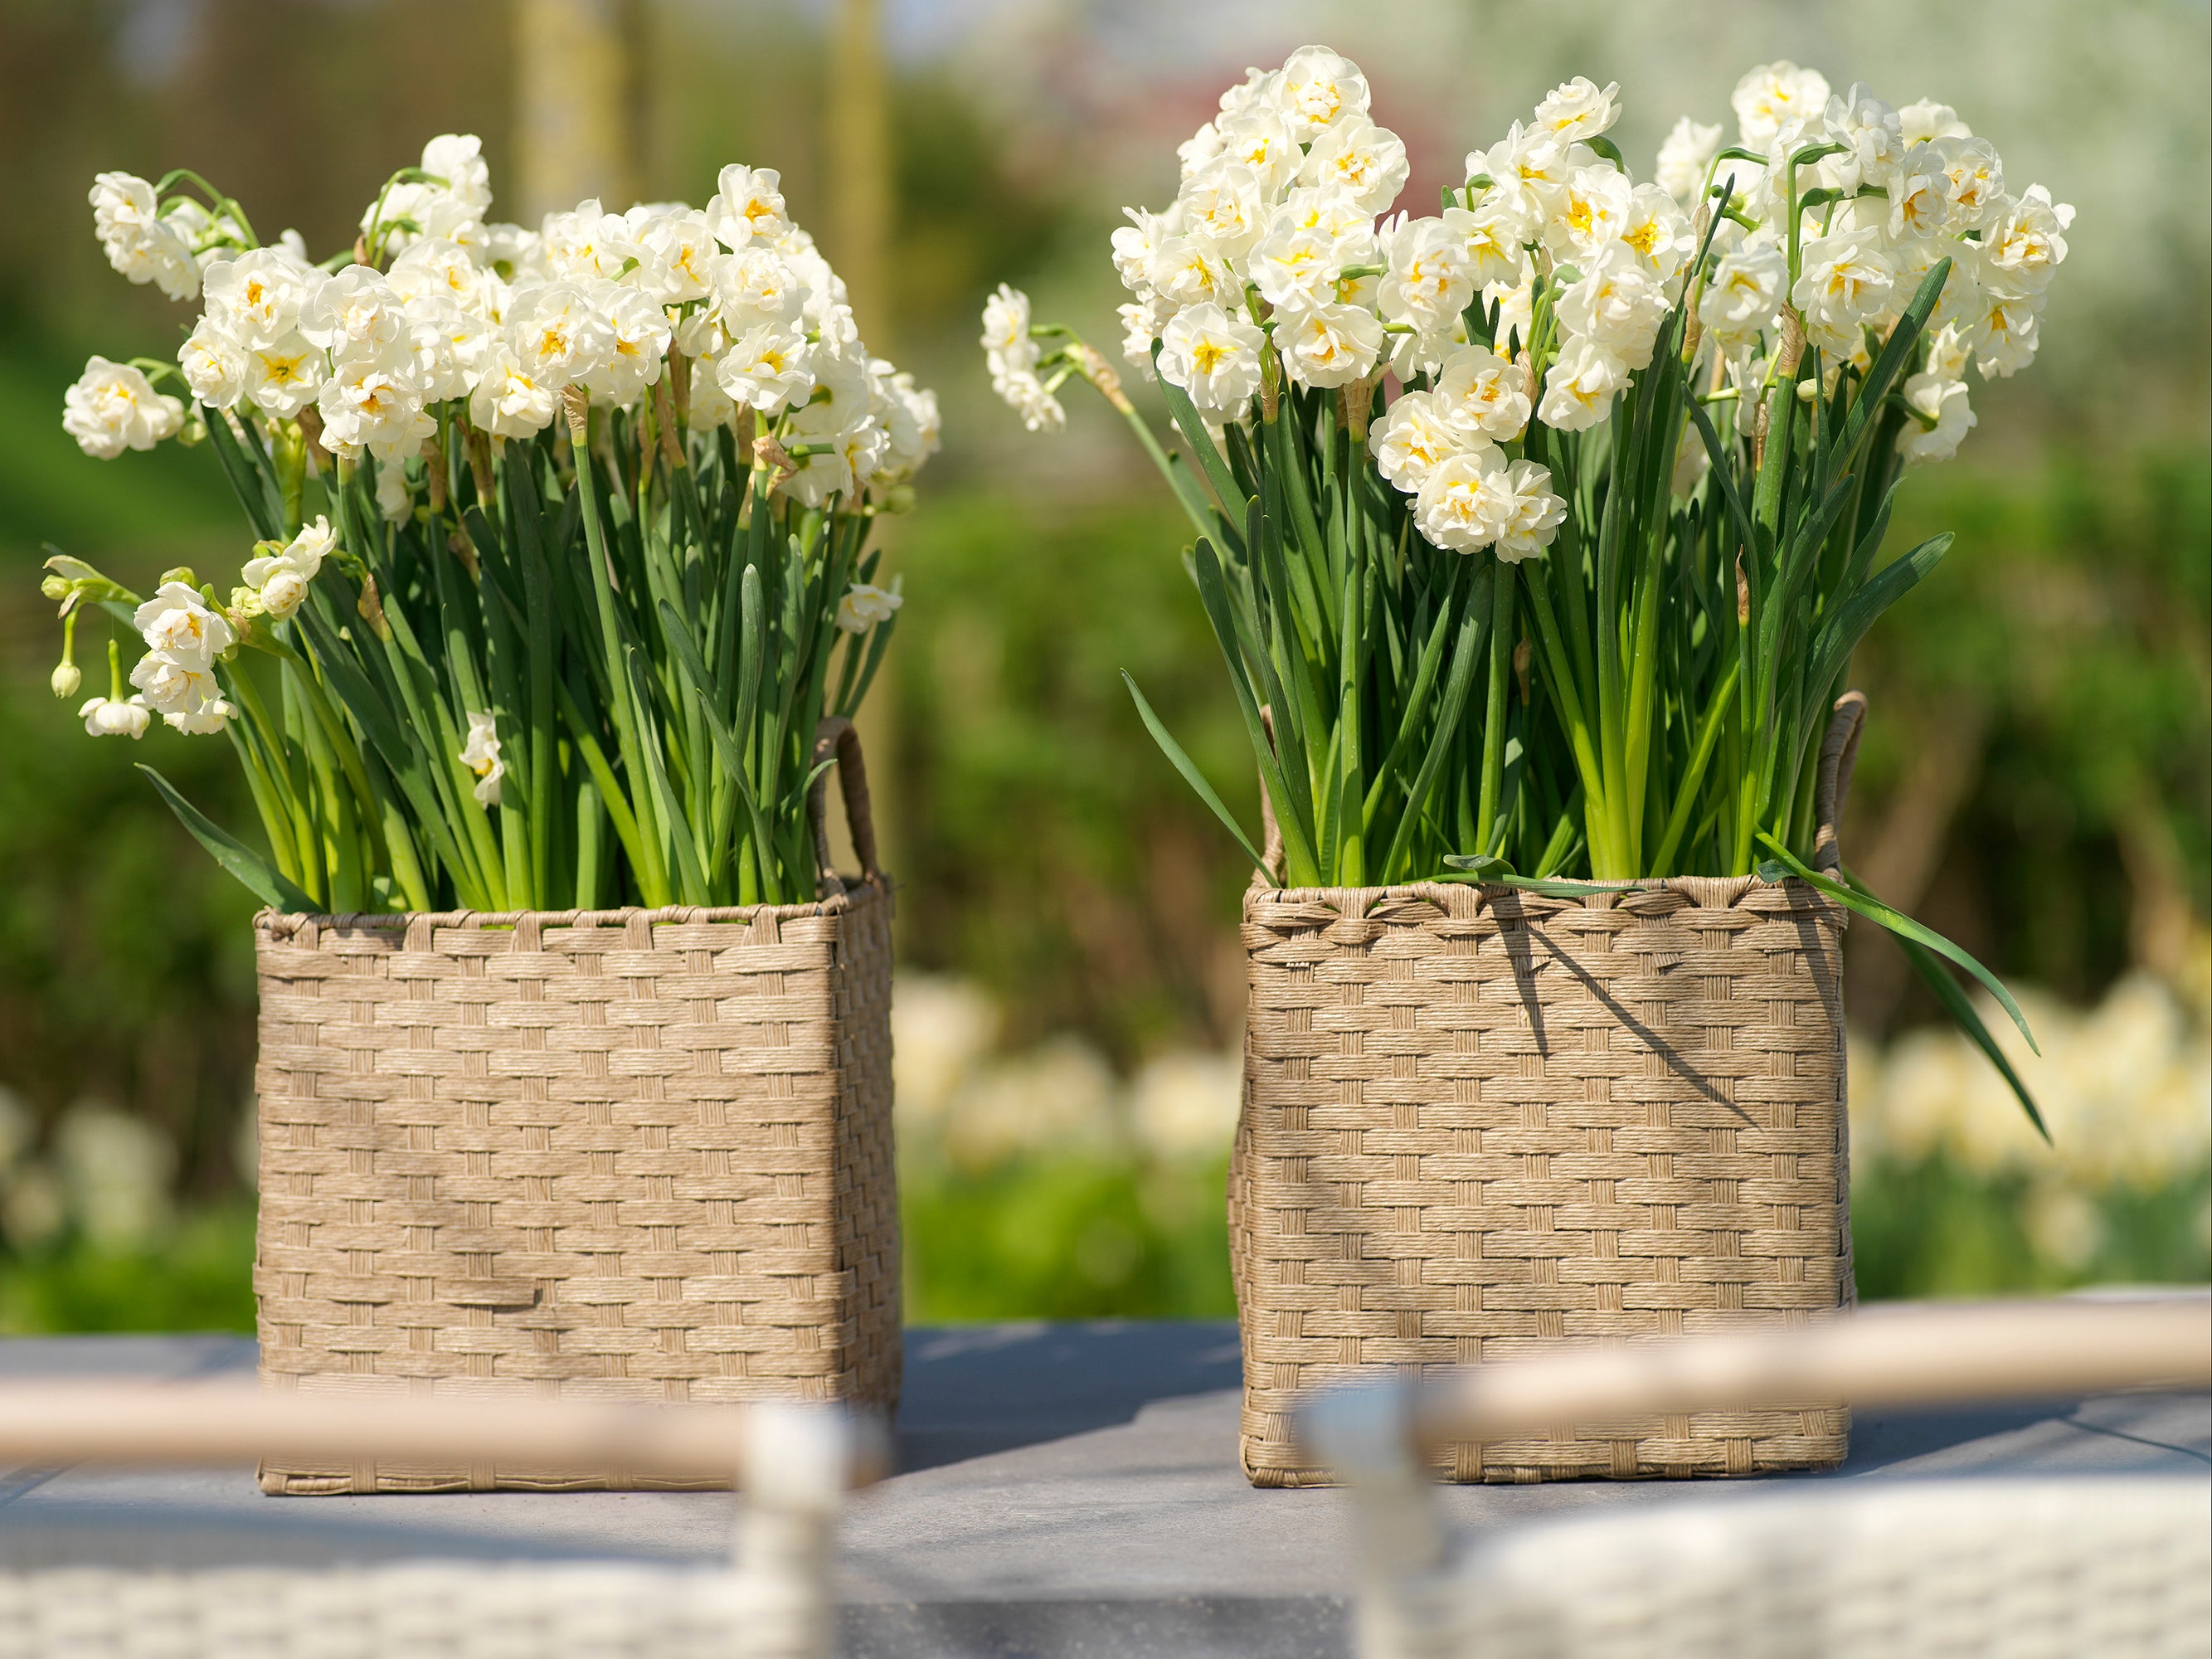  How to Grow Daffodils in Pots or Containers?